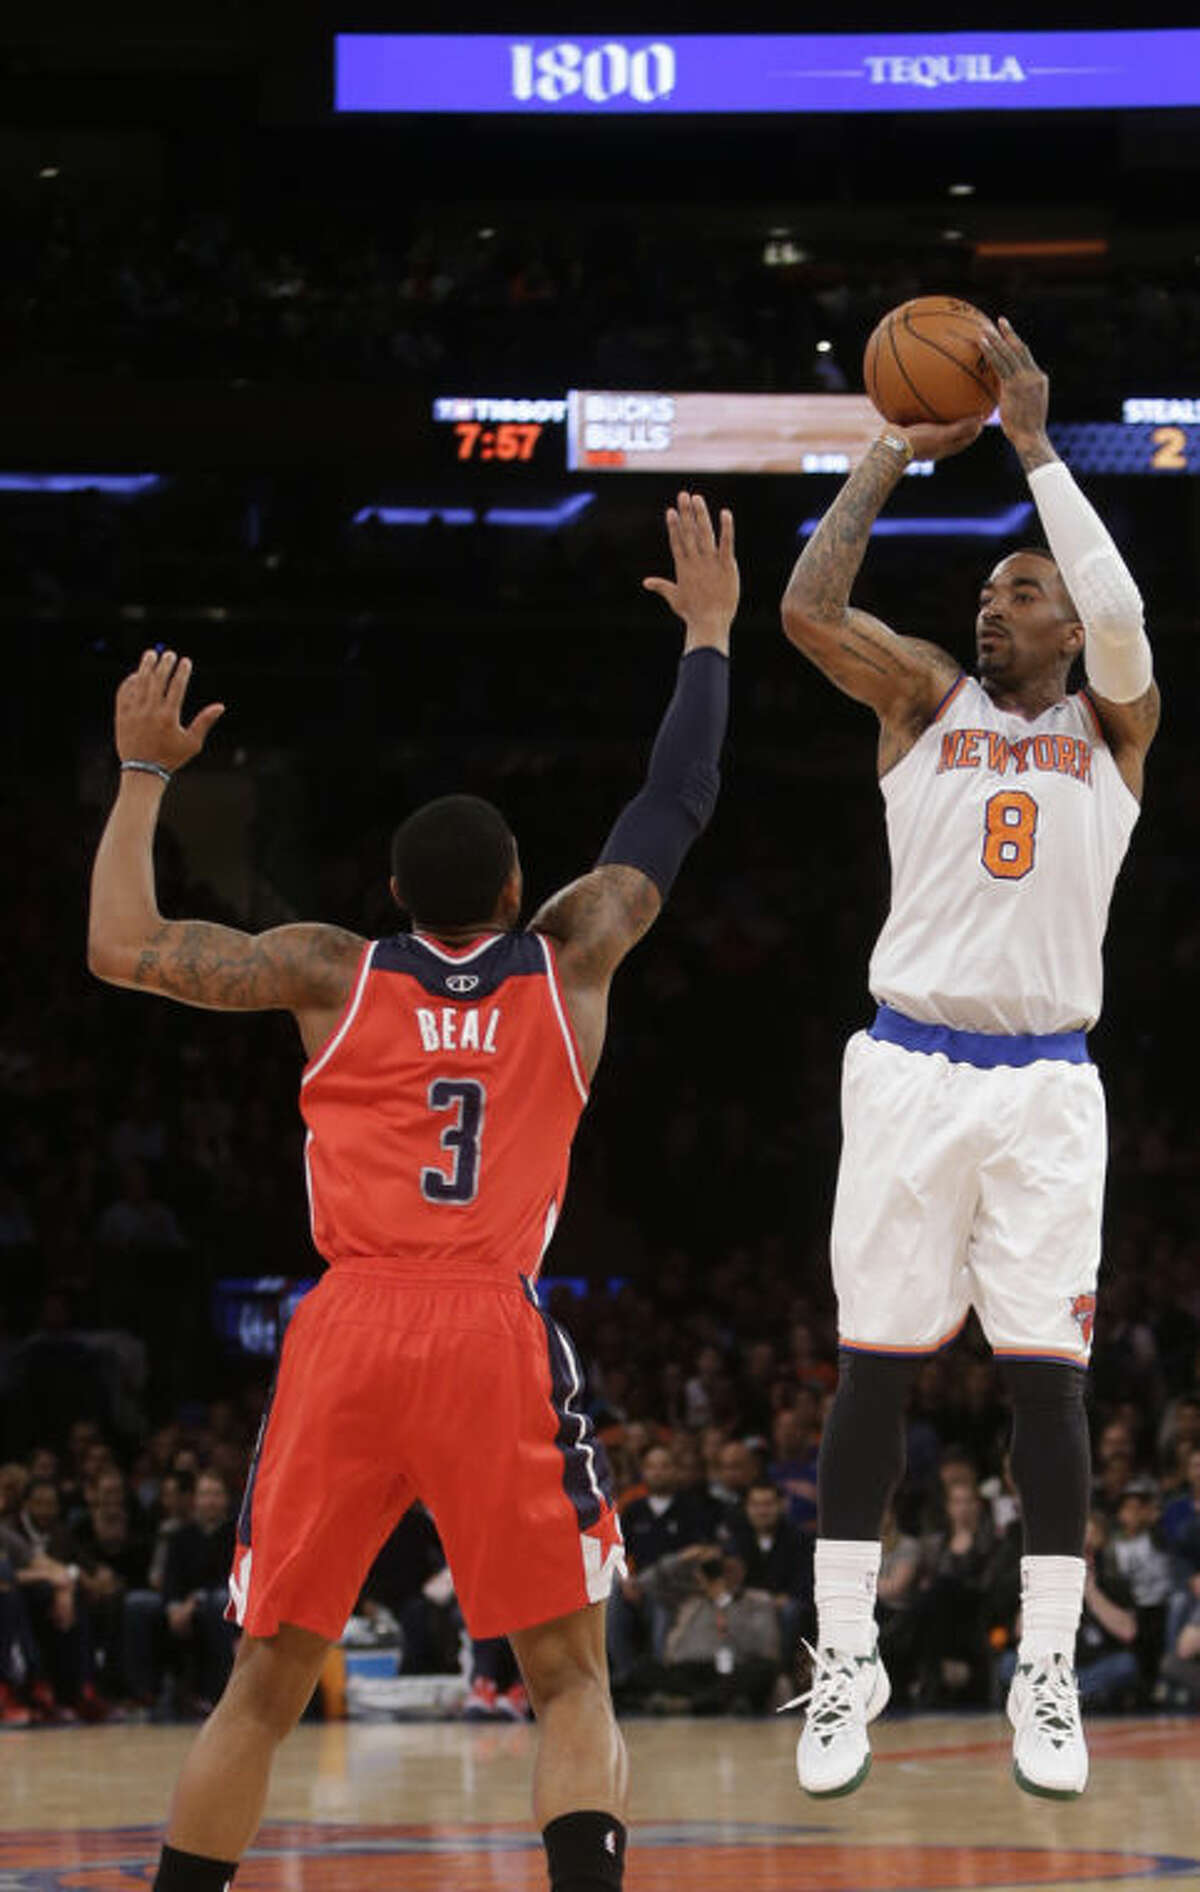 New York Knicks' J.R. Smith (8) shoots over Washington Wizards' John Wall (2) during the first half of an NBA basketball game Friday, April 4, 2014, in New York. (AP Photo/Frank Franklin II)